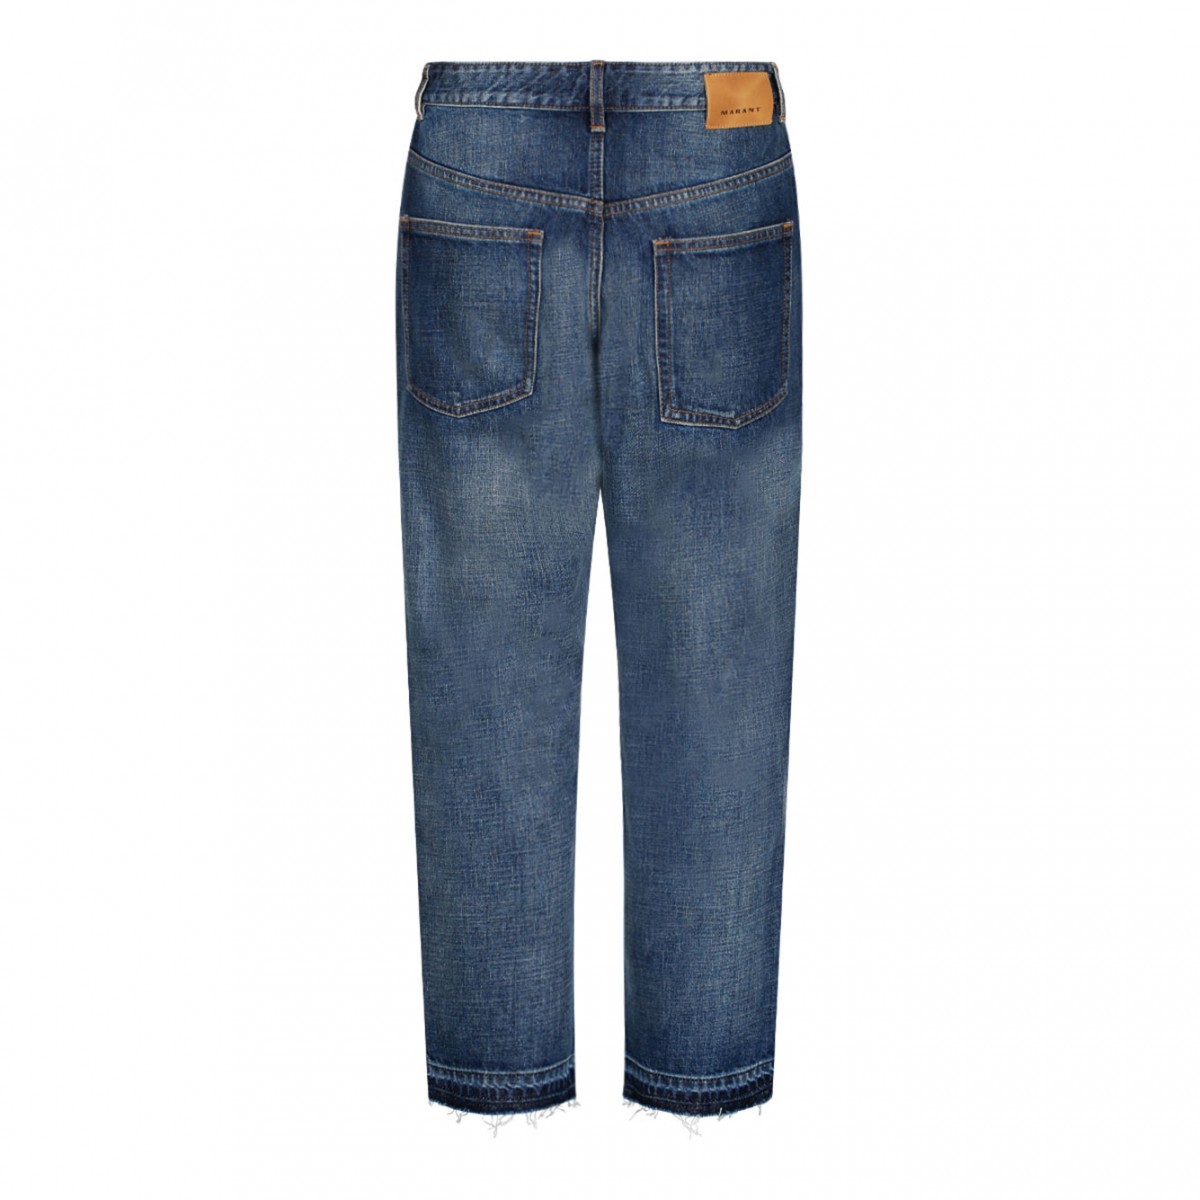 Straight jeans Prada Blue size 31 US in Cotton - 35276166